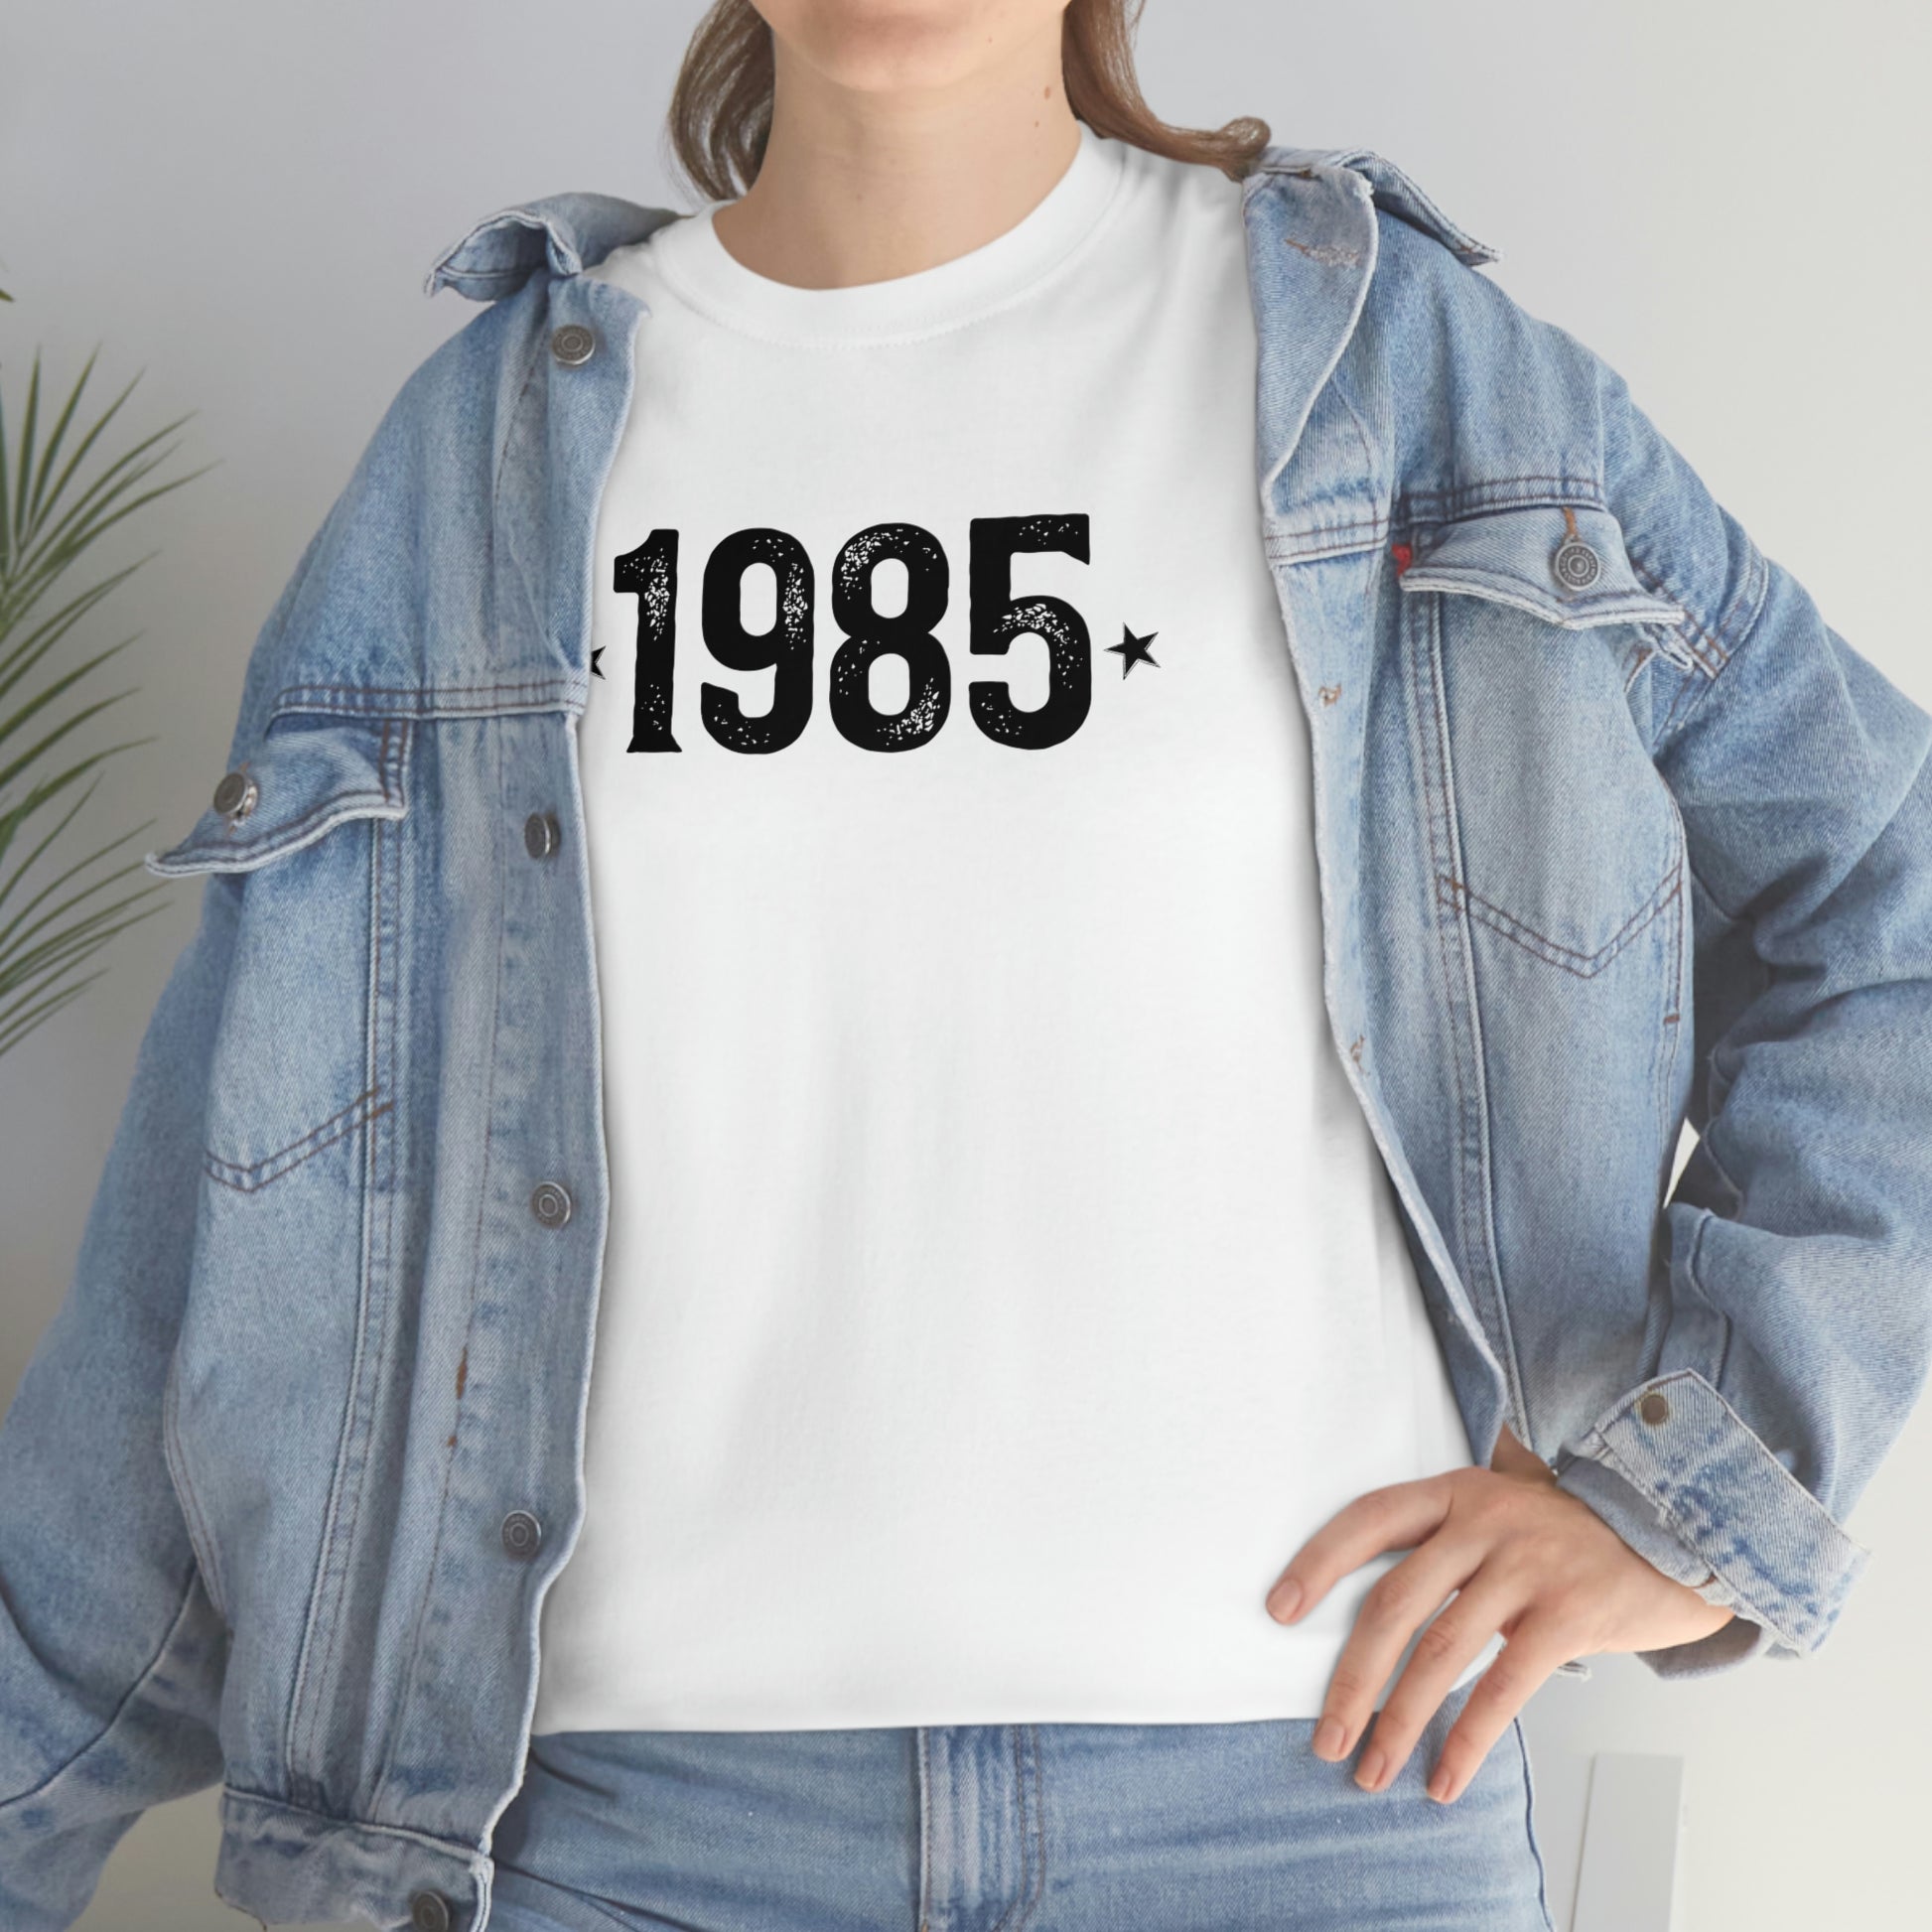 Commemorate the year 1985 with a cotton t-shirt featuring a tear-away label